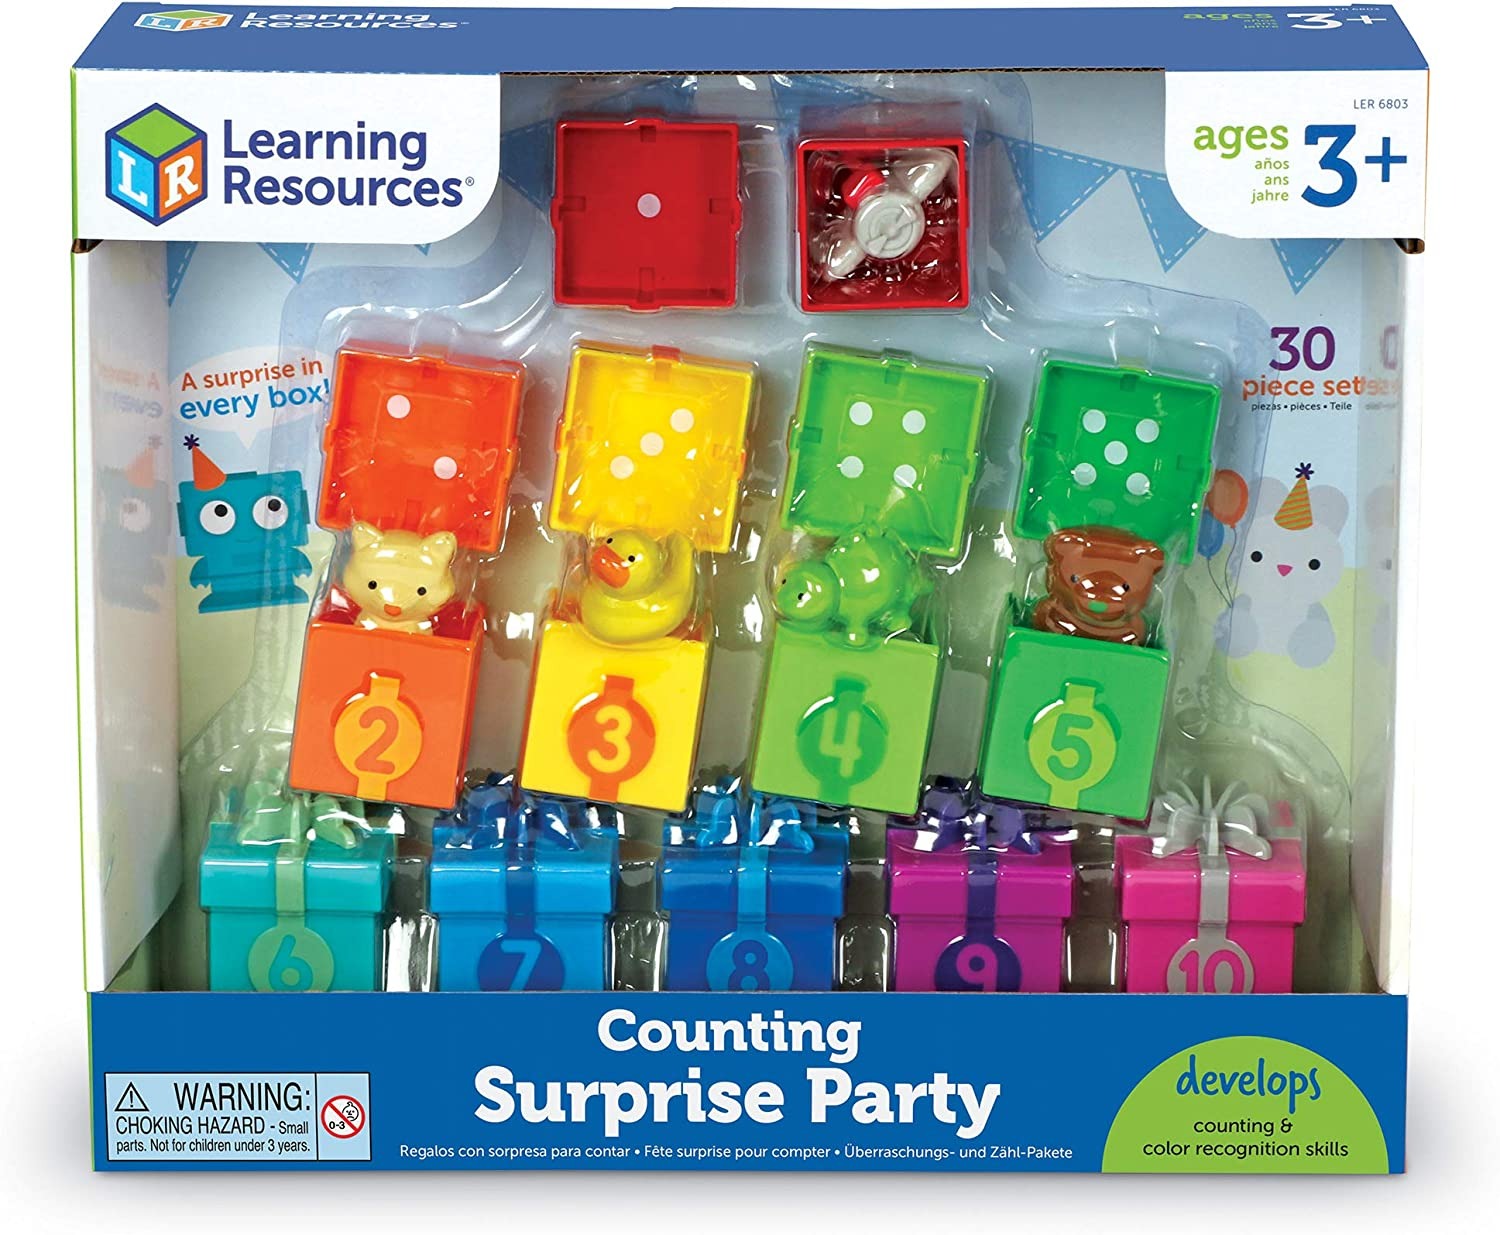 Counting Surprise Party, The Counting Surprise Party is a delightful learning toy designed to provide hours of educational fun for your child. This collection includes a range of numbered boxes, each containing a different colourful object. The boxes are adorned with numerals on the front and a dot array inside the lid, making it easy for children to match the lid to the correct numbered box. Each box is a treasure trove of fun, containing various objects from a friendly cat to a vibrant purple teapot. Thes